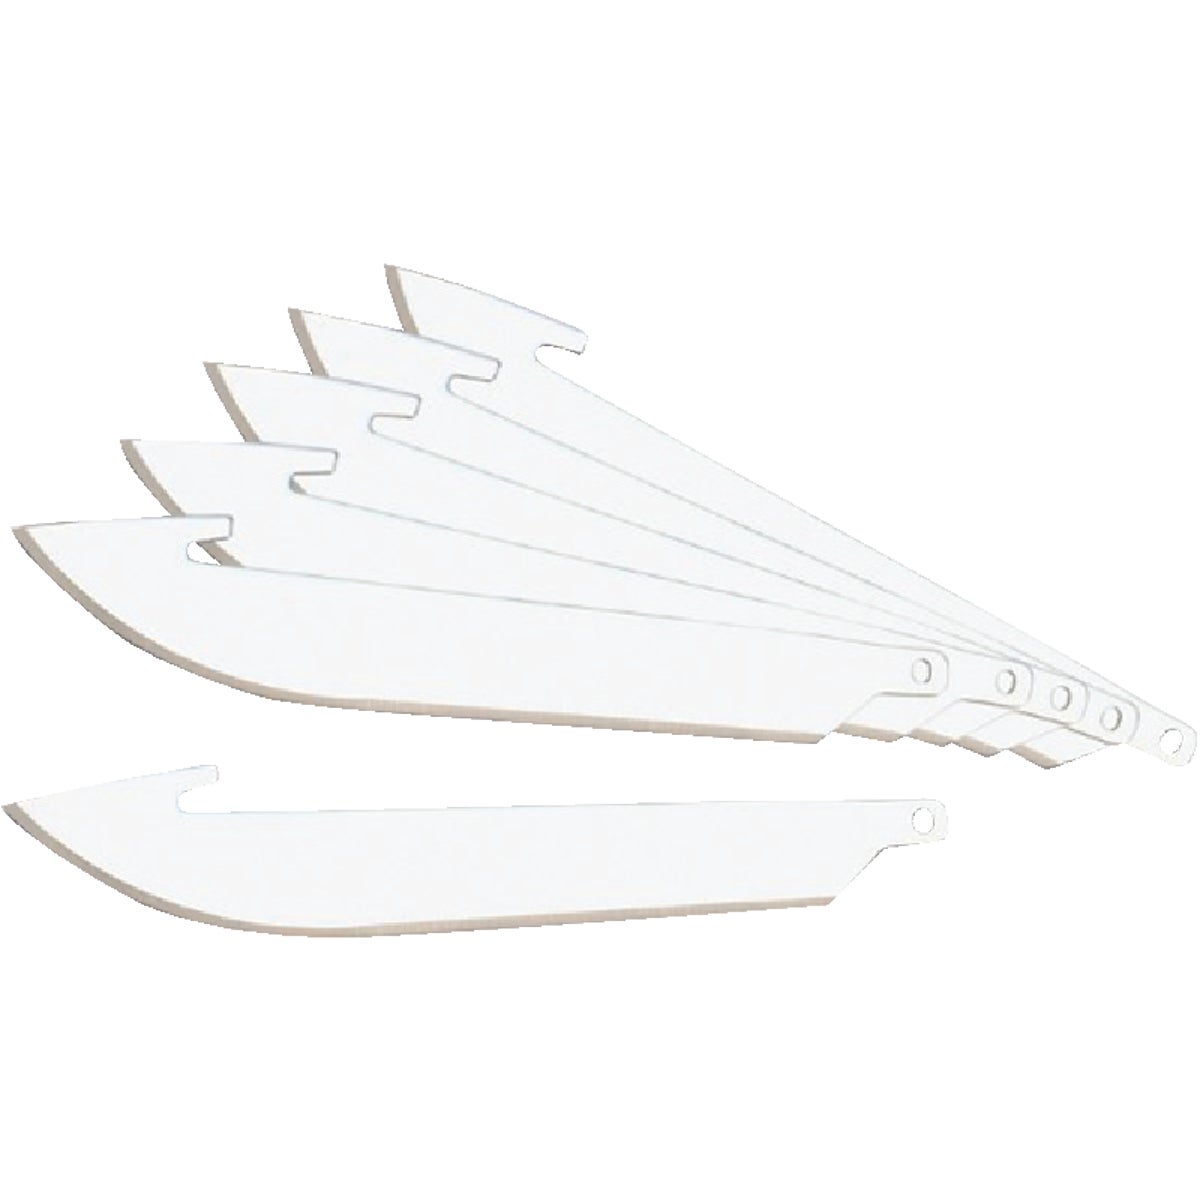 Item 705041, Replacement blade for all Razor-Lite series knives.